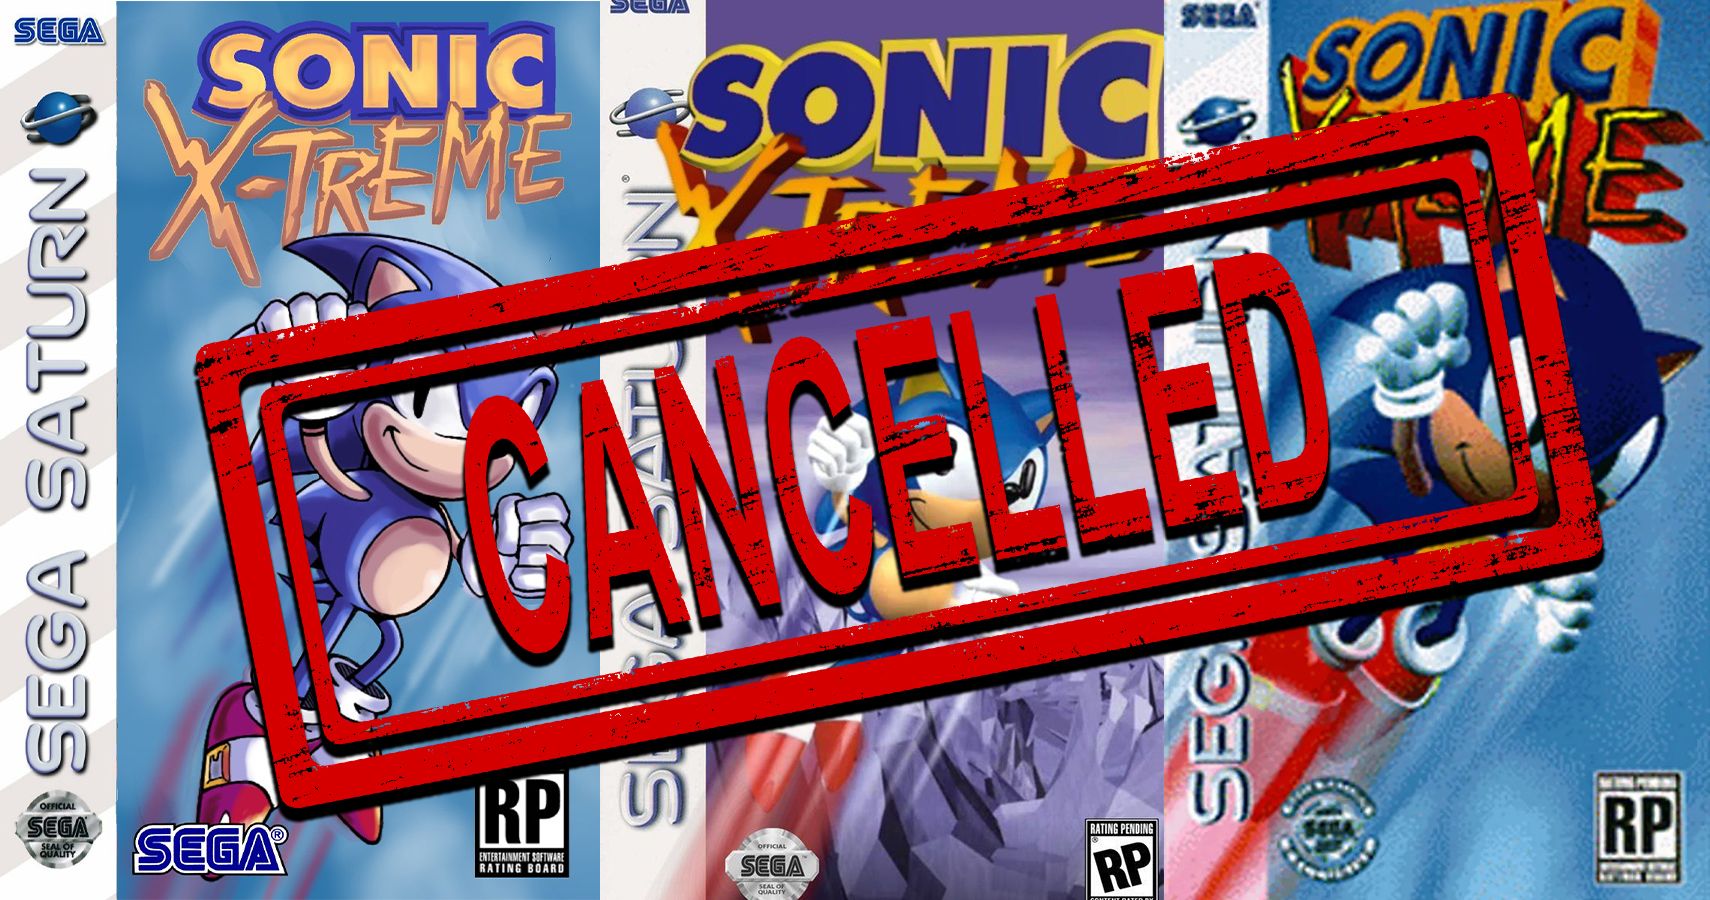 Sonic X-Treme Cover art with cancelled stamp